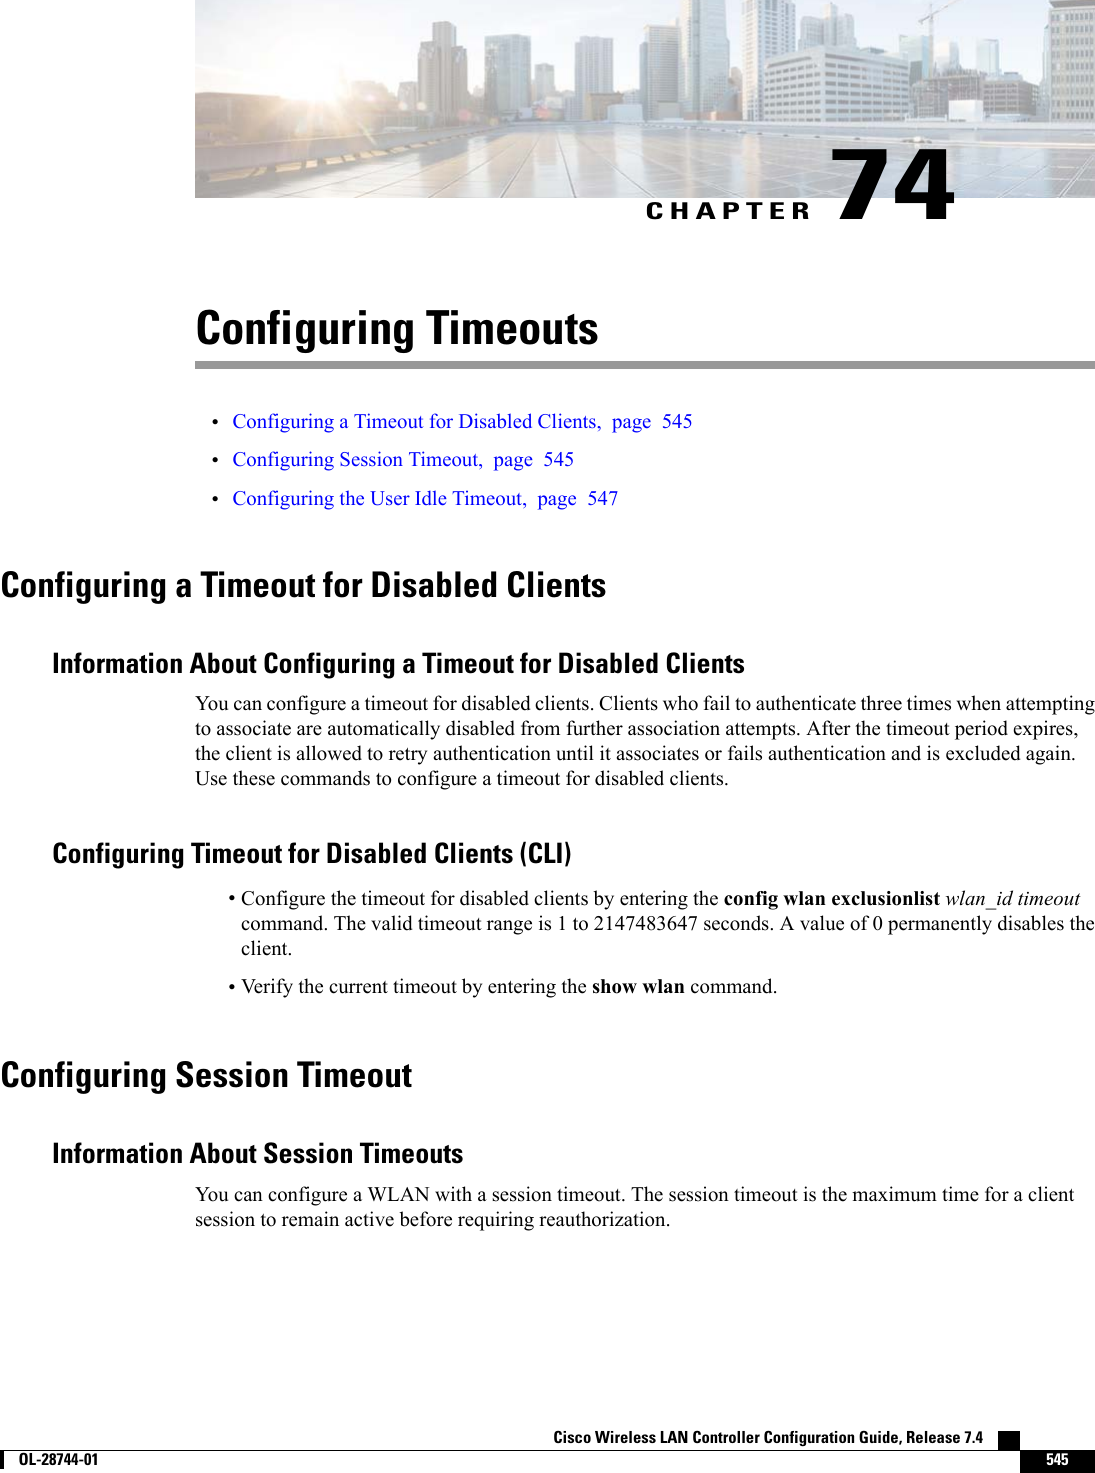 CHAPTER 74Configuring Timeouts•Configuring a Timeout for Disabled Clients, page 545•Configuring Session Timeout, page 545•Configuring the User Idle Timeout, page 547Configuring a Timeout for Disabled ClientsInformation About Configuring a Timeout for Disabled ClientsYou can configure a timeout for disabled clients. Clients who fail to authenticate three times when attemptingto associate are automatically disabled from further association attempts. After the timeout period expires,the client is allowed to retry authentication until it associates or fails authentication and is excluded again.Use these commands to configure a timeout for disabled clients.Configuring Timeout for Disabled Clients (CLI)•Configure the timeout for disabled clients by entering the config wlan exclusionlist wlan_id timeoutcommand. The valid timeout range is 1 to 2147483647 seconds. A value of 0 permanently disables theclient.•Verify the current timeout by entering the show wlan command.Configuring Session TimeoutInformation About Session TimeoutsYou can configure a WLAN with a session timeout. The session timeout is the maximum time for a clientsession to remain active before requiring reauthorization.Cisco Wireless LAN Controller Configuration Guide, Release 7.4        OL-28744-01 545